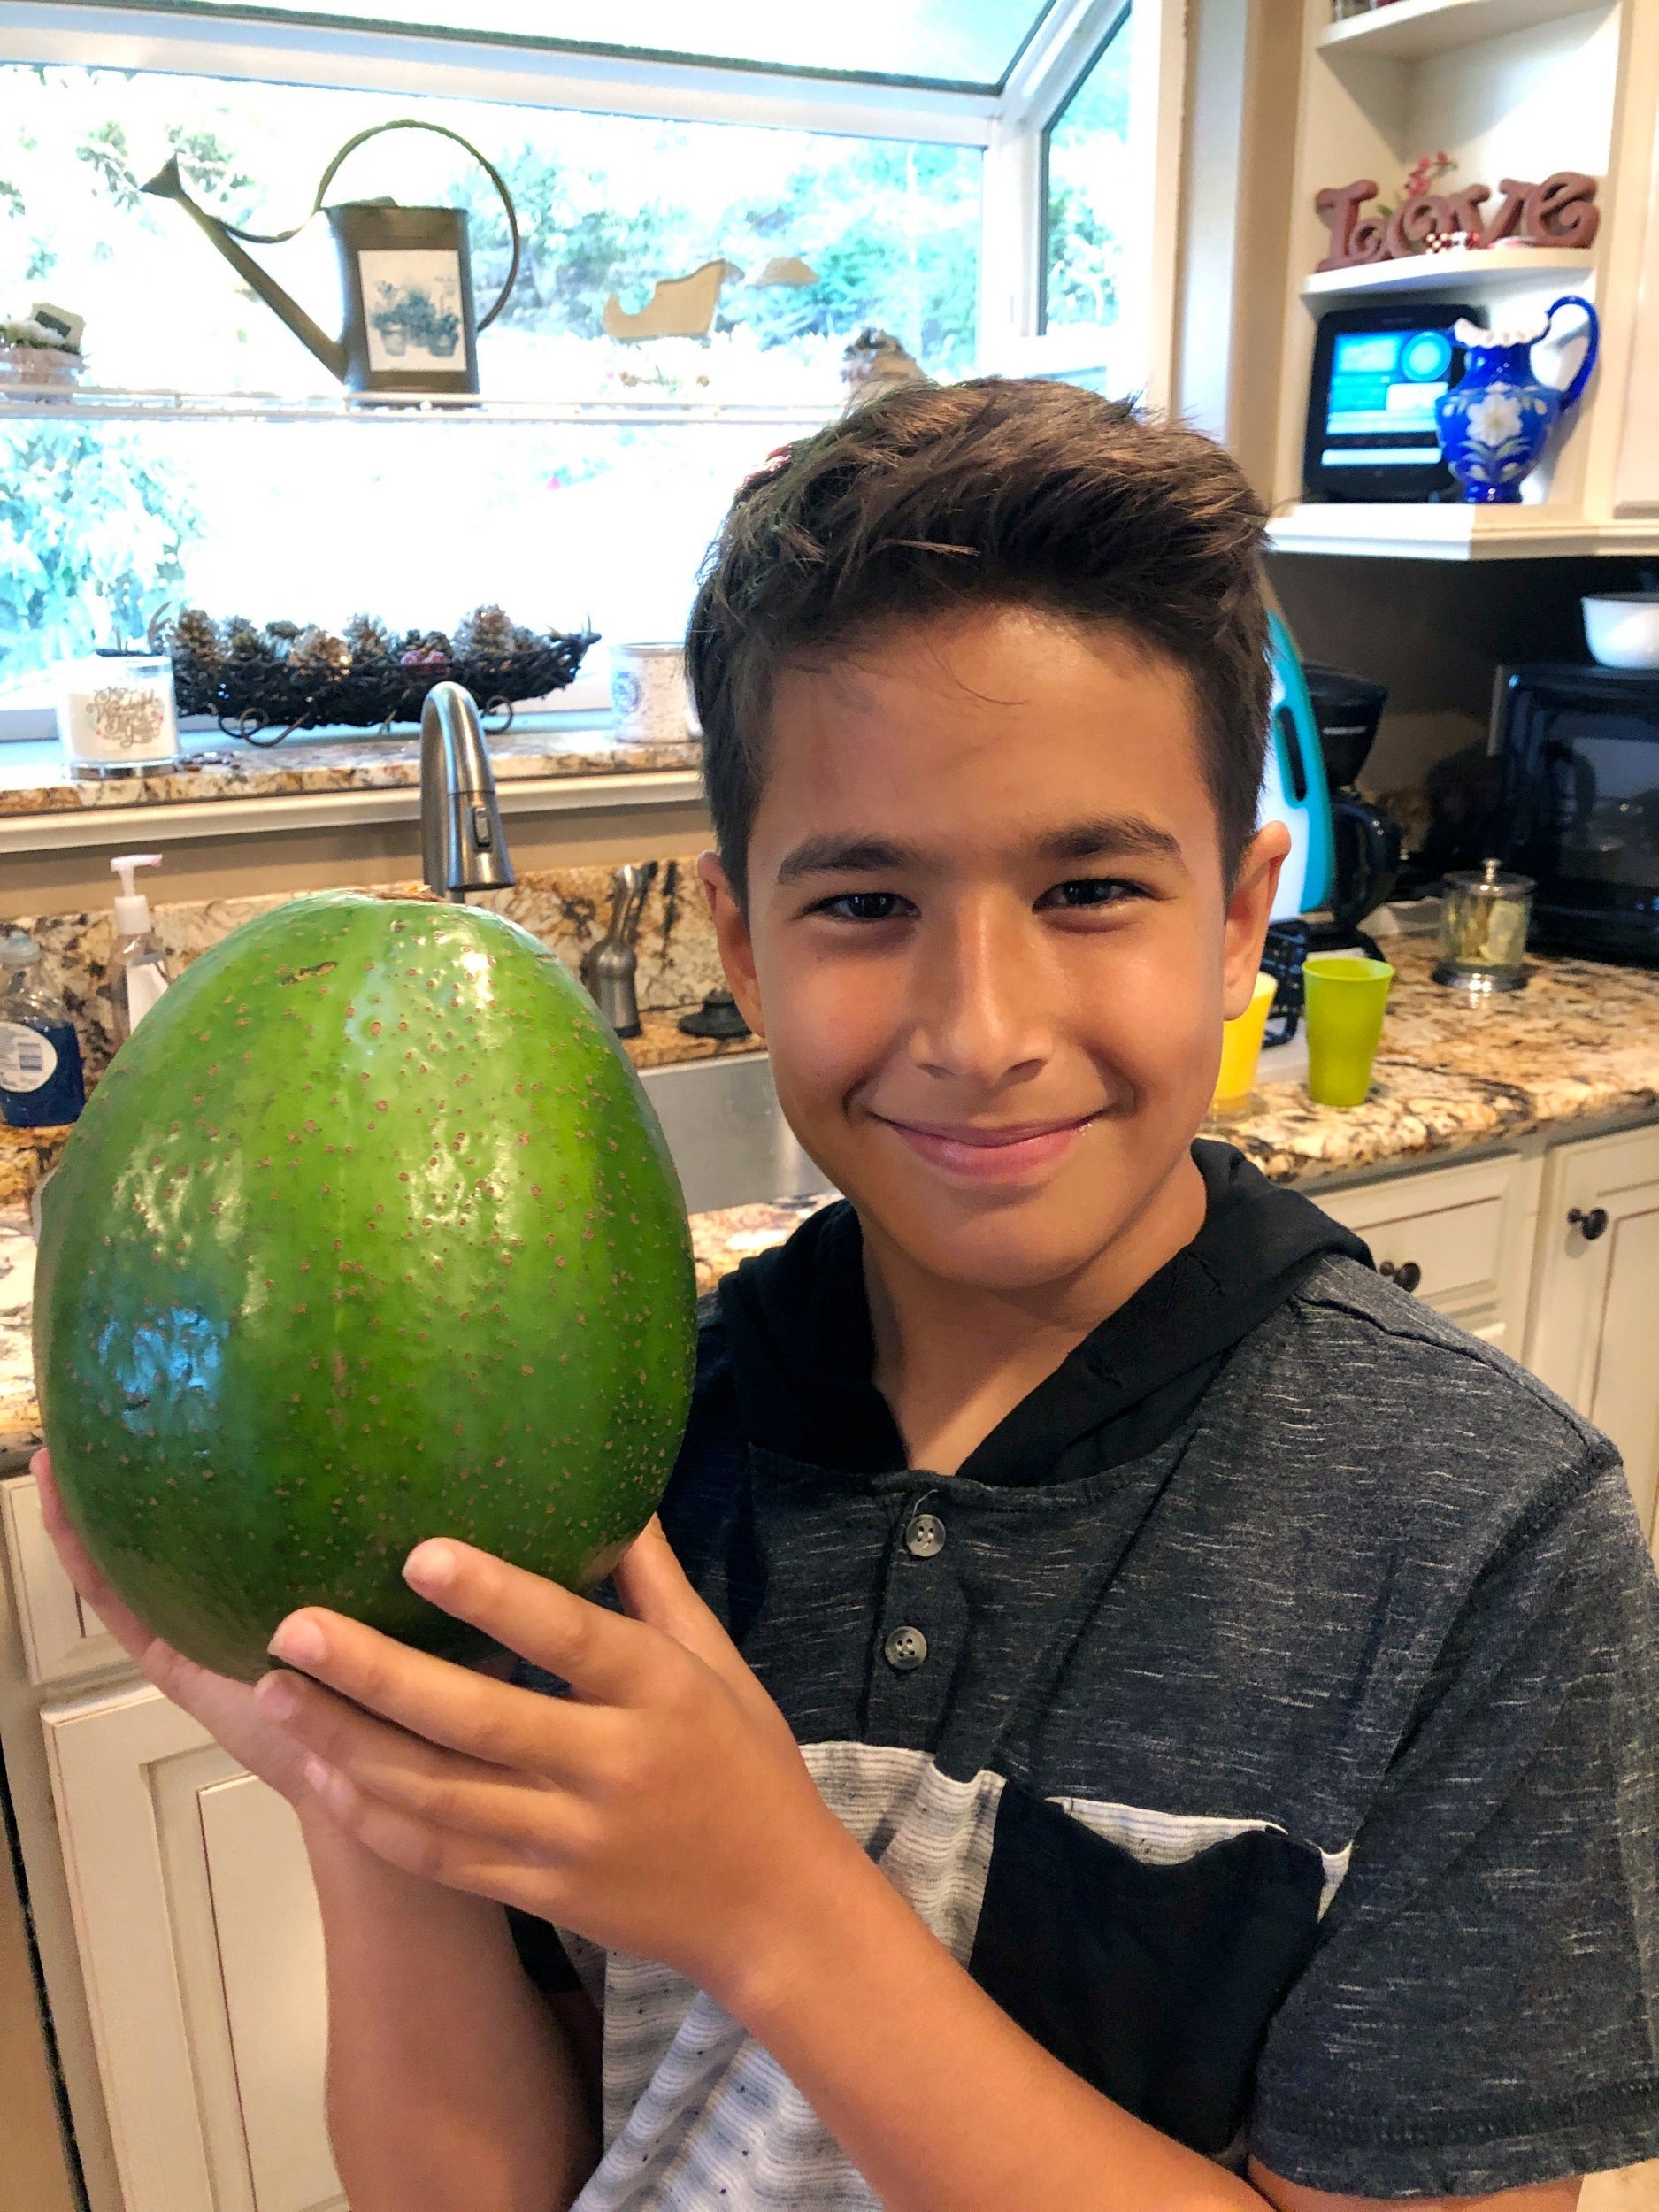 This picture, taken on 13 December 2018, shows Lo’ihi Pokini posing with the record-winning avocado at Kula Country Farms in Kula, Hawaii